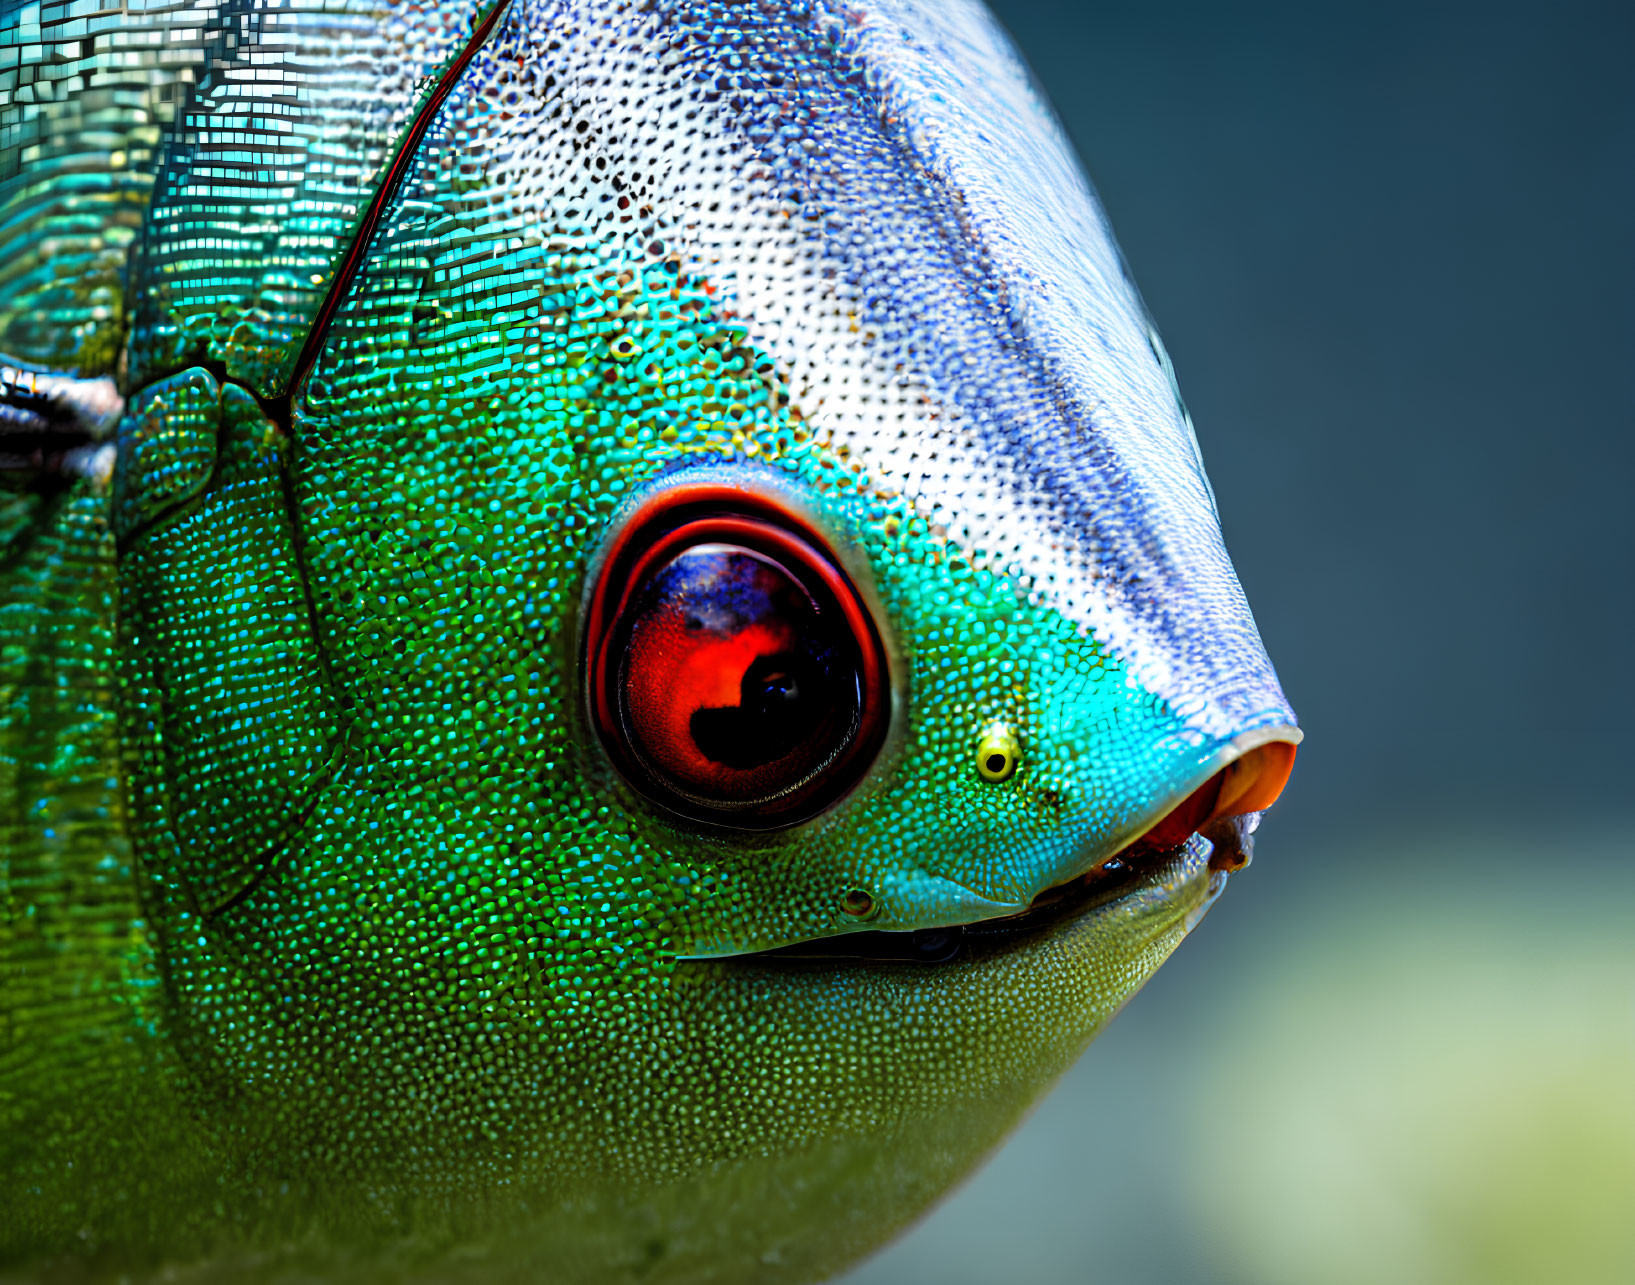 Iridescent fish with shiny red eye.